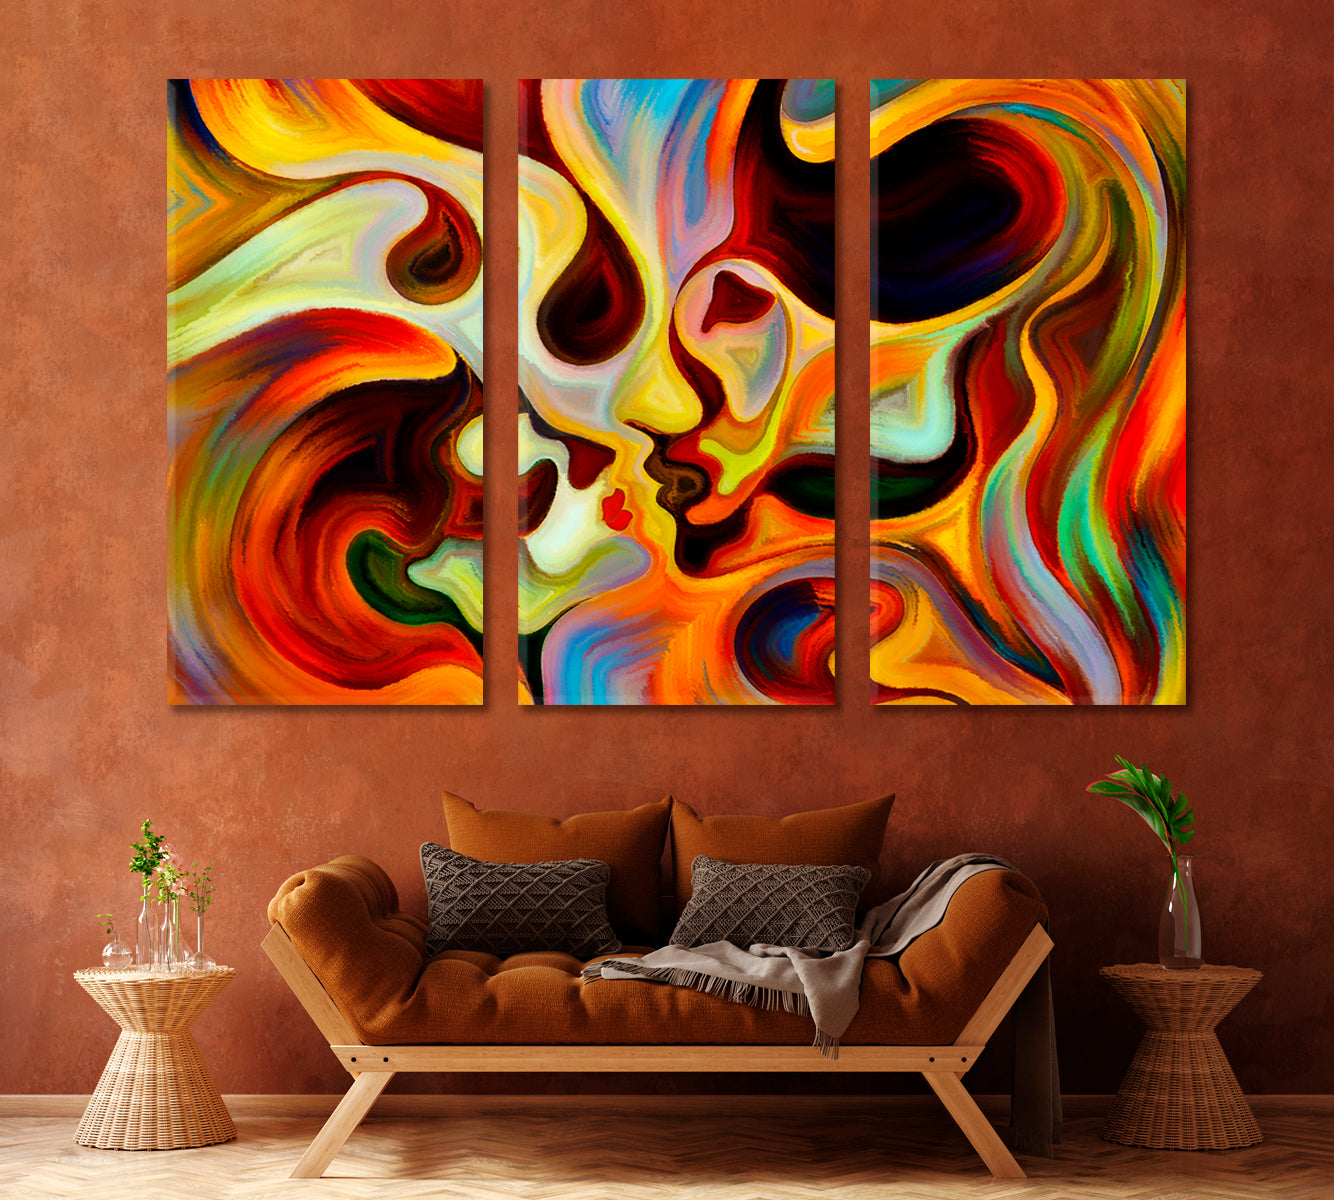 Colors of the Mind Graceful Profile Lines Abstract Vision Contemporary Art Artesty 3 panels 36" x 24" 